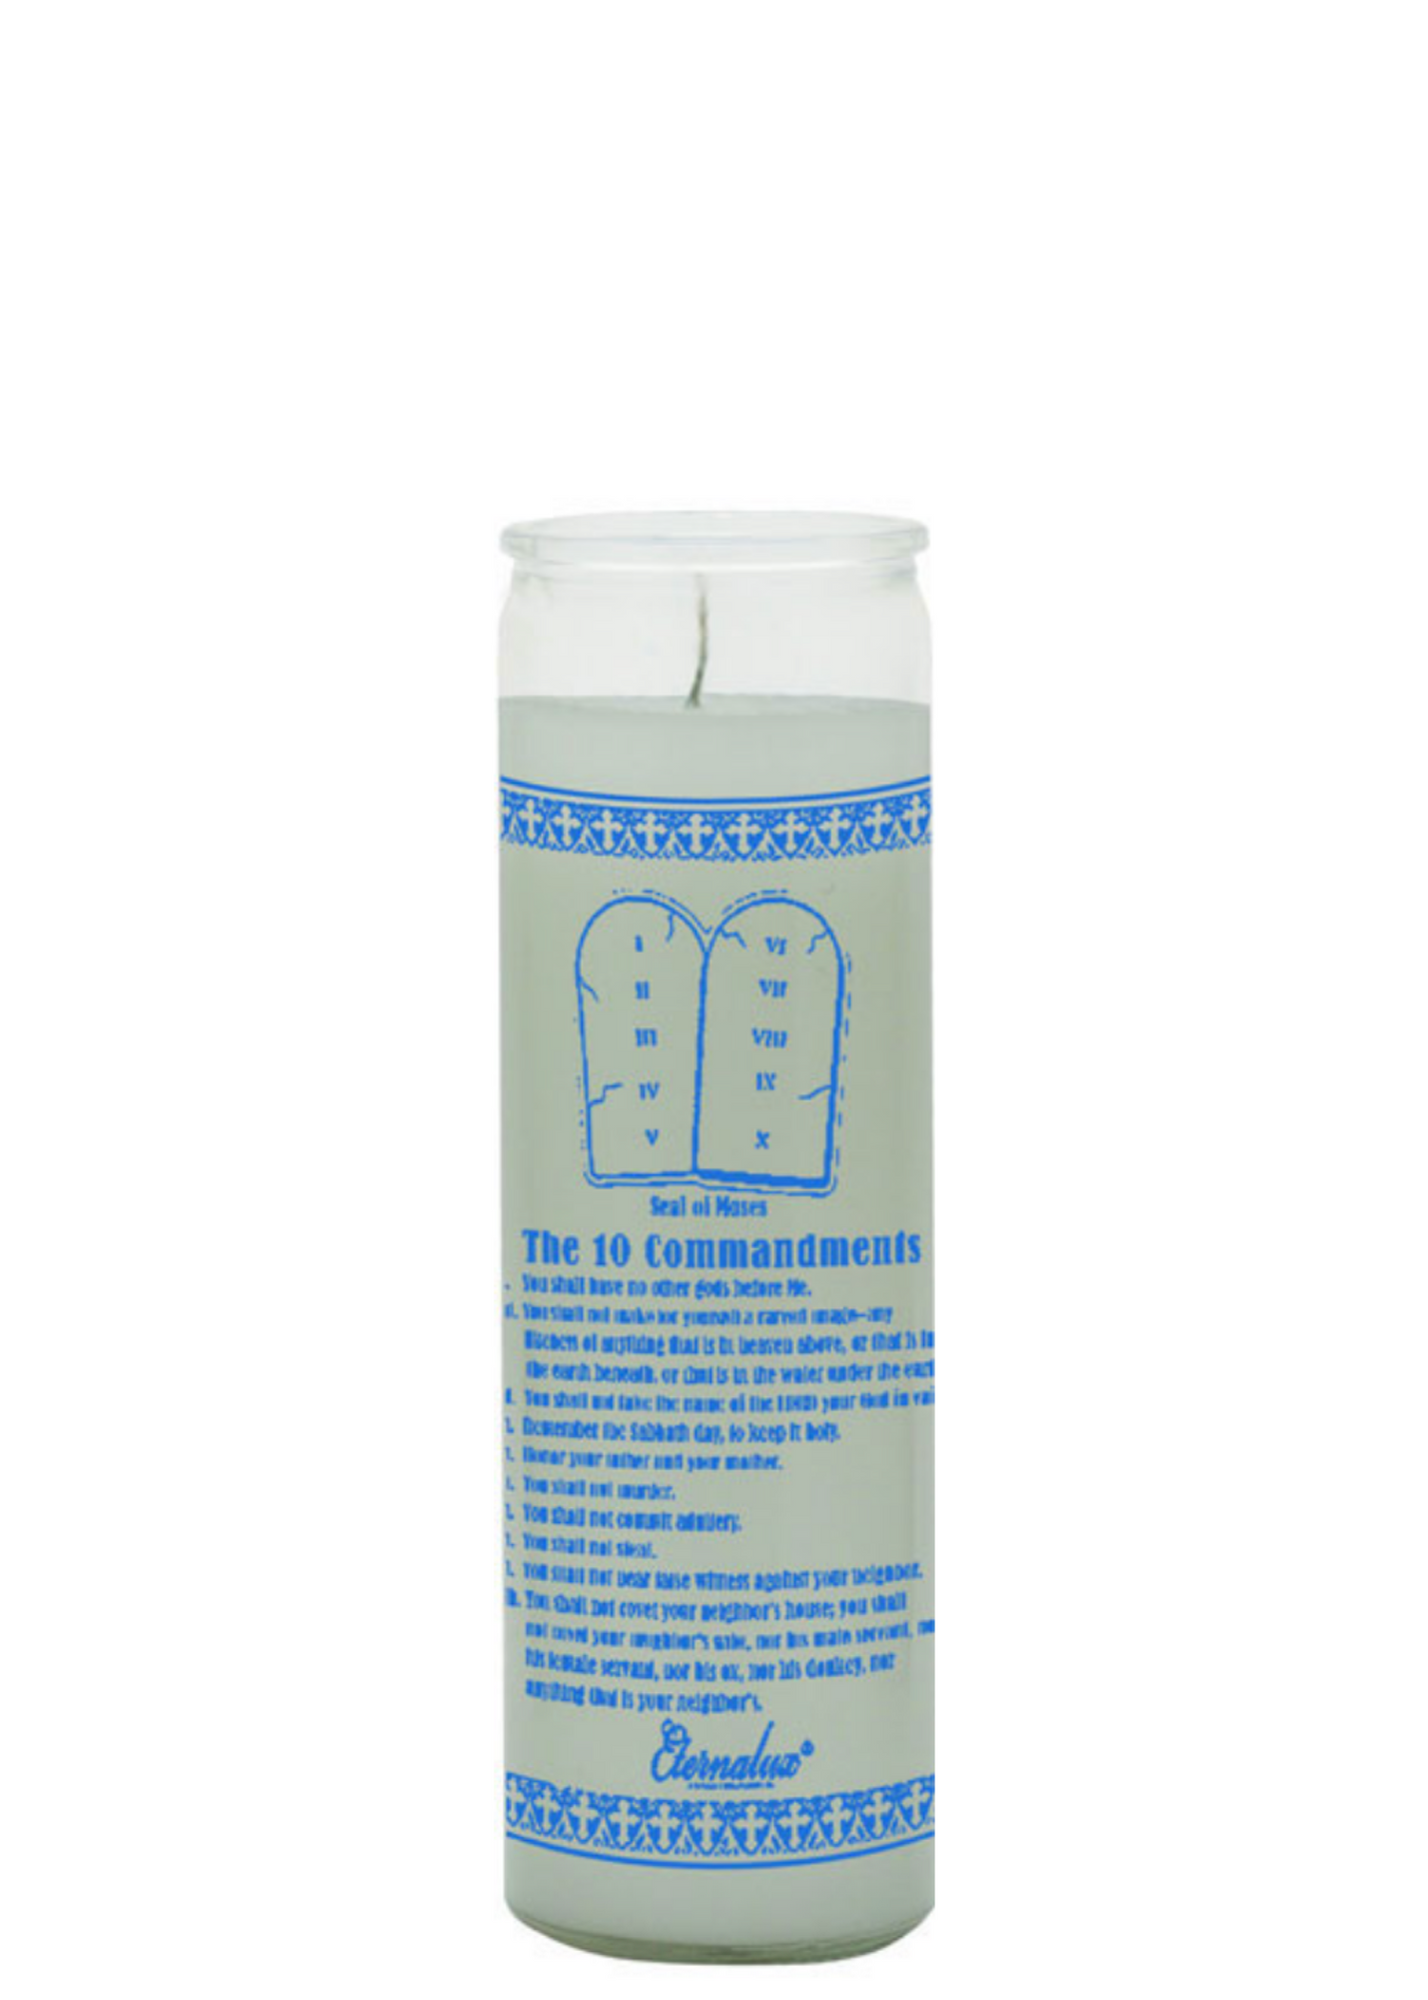 PSALMS 23rd (White) 1 COLOR 7 DAY CANDLE